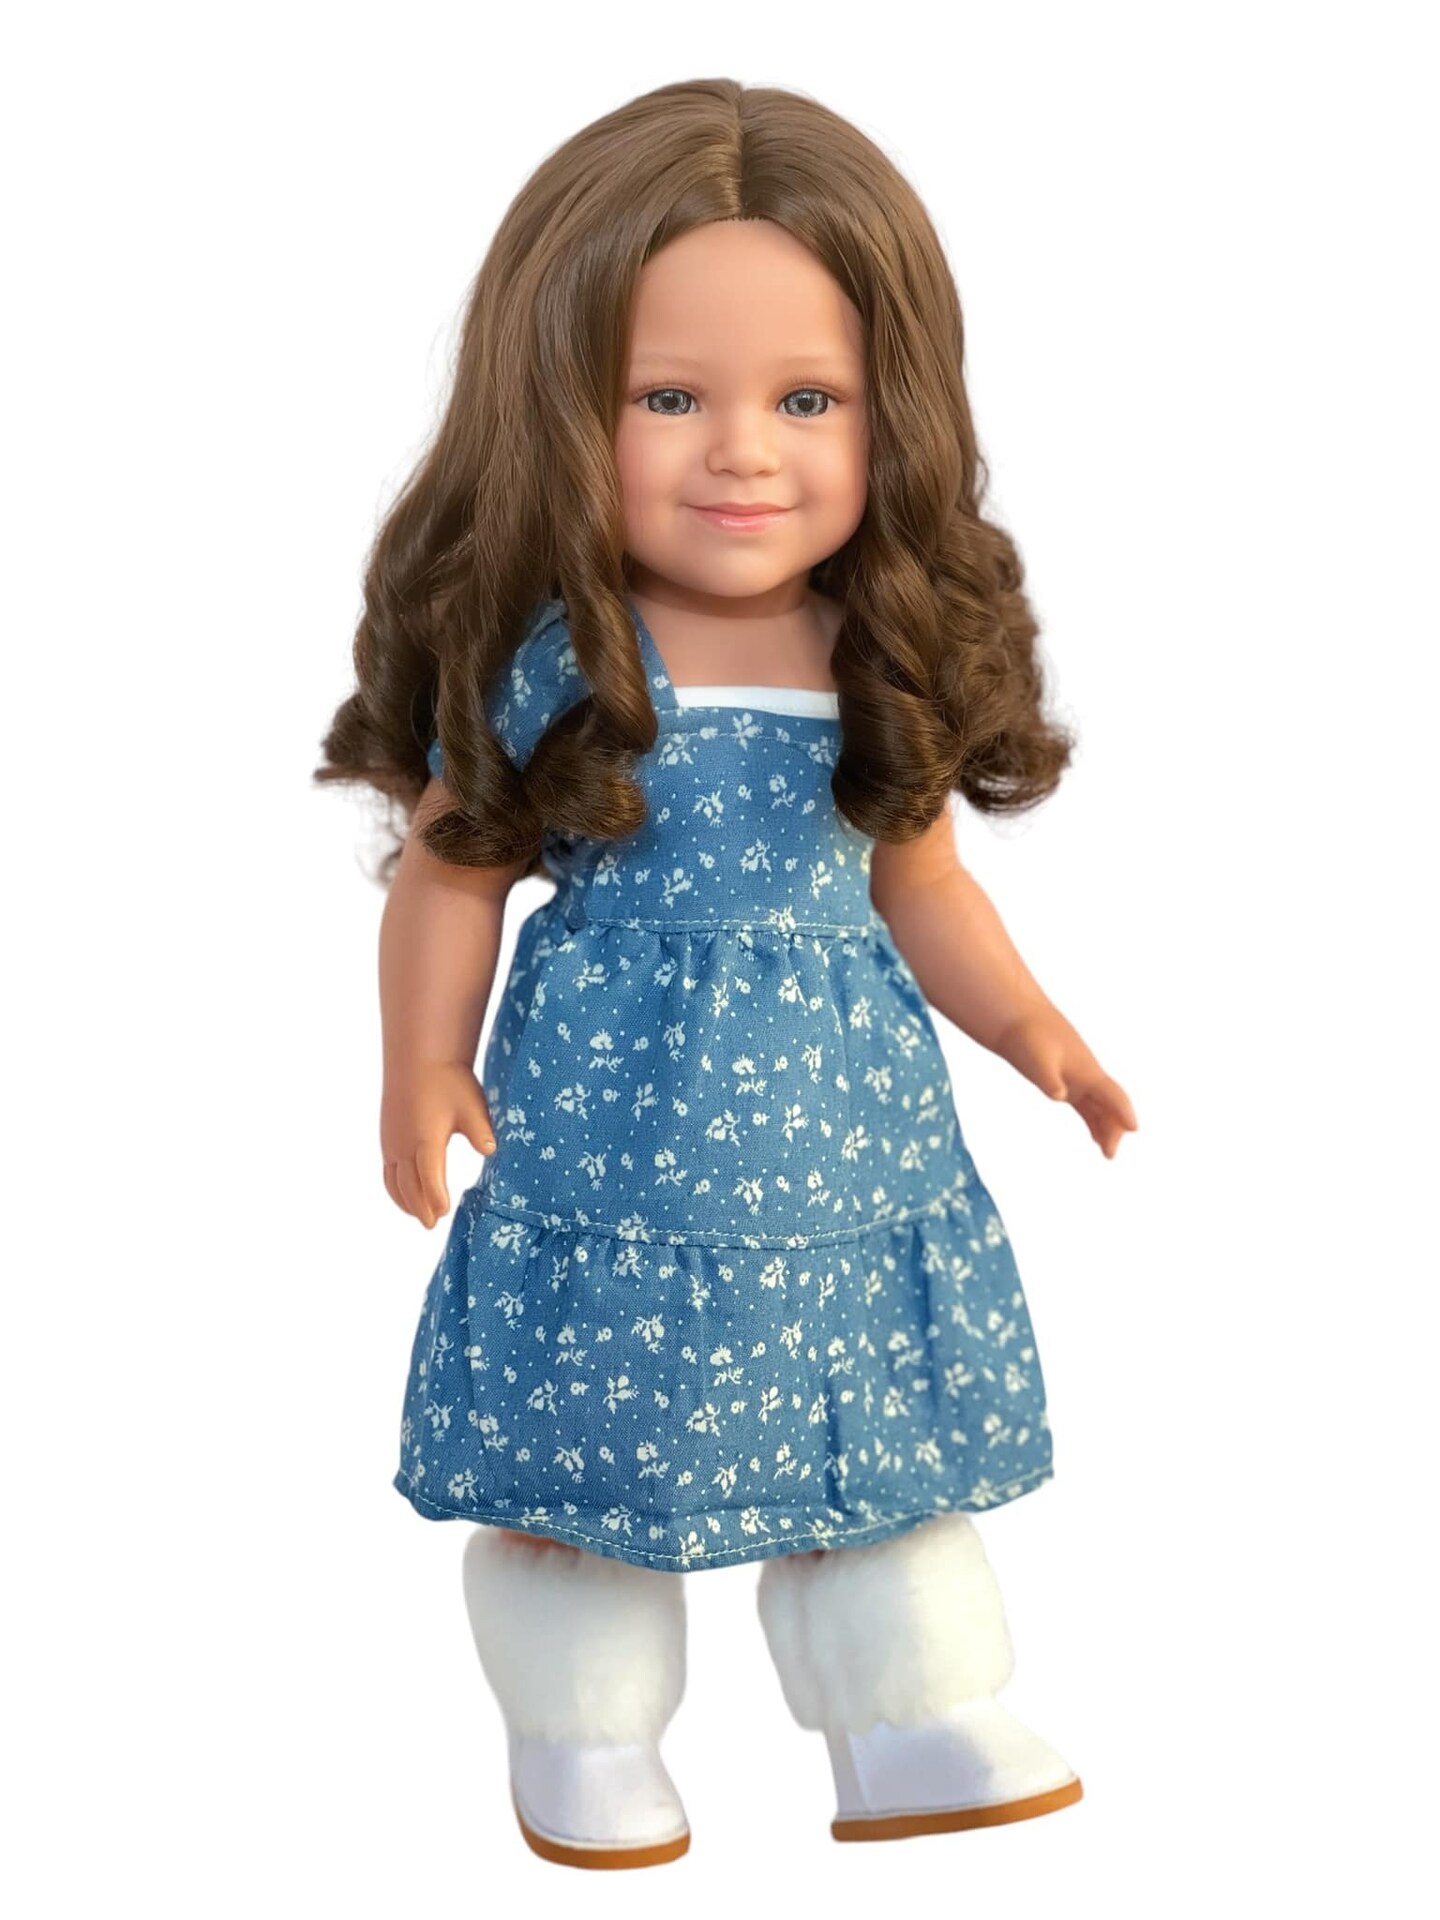 Shelby&#x27;s Sweet Charm: 18-Inch Doll with Brown Curly Hair and Blue Eyes